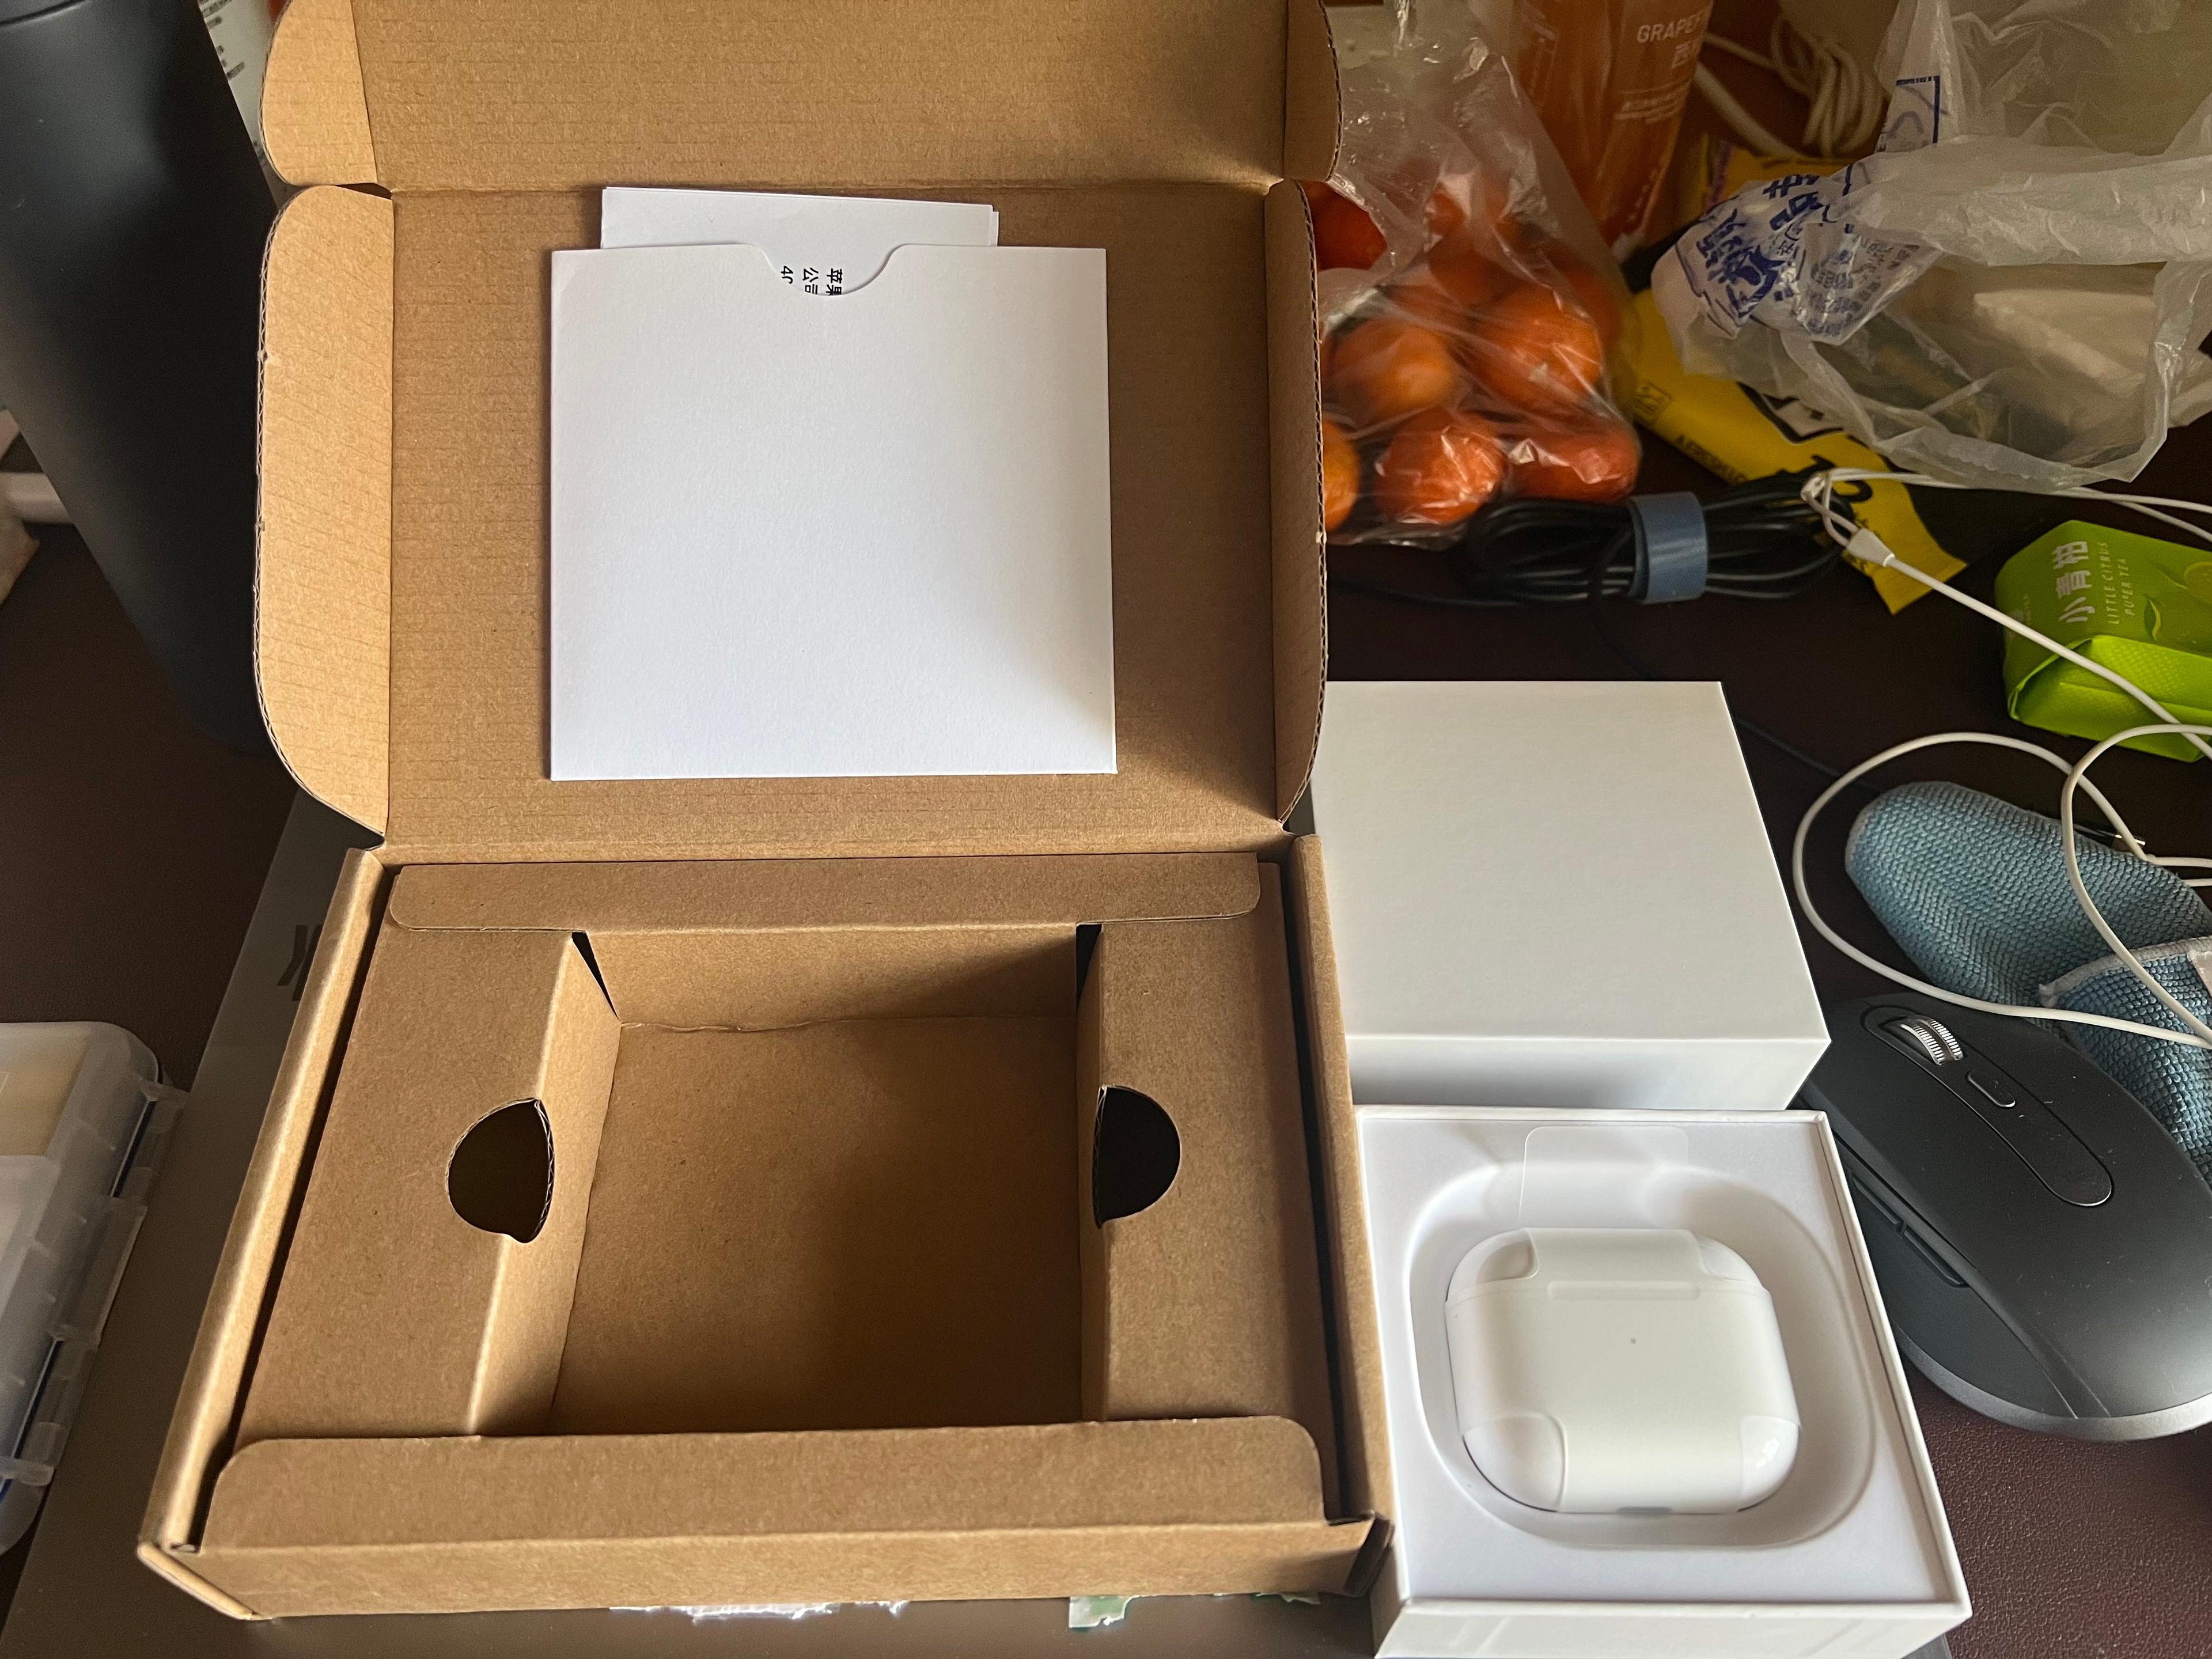 Packaging for the new Airpods